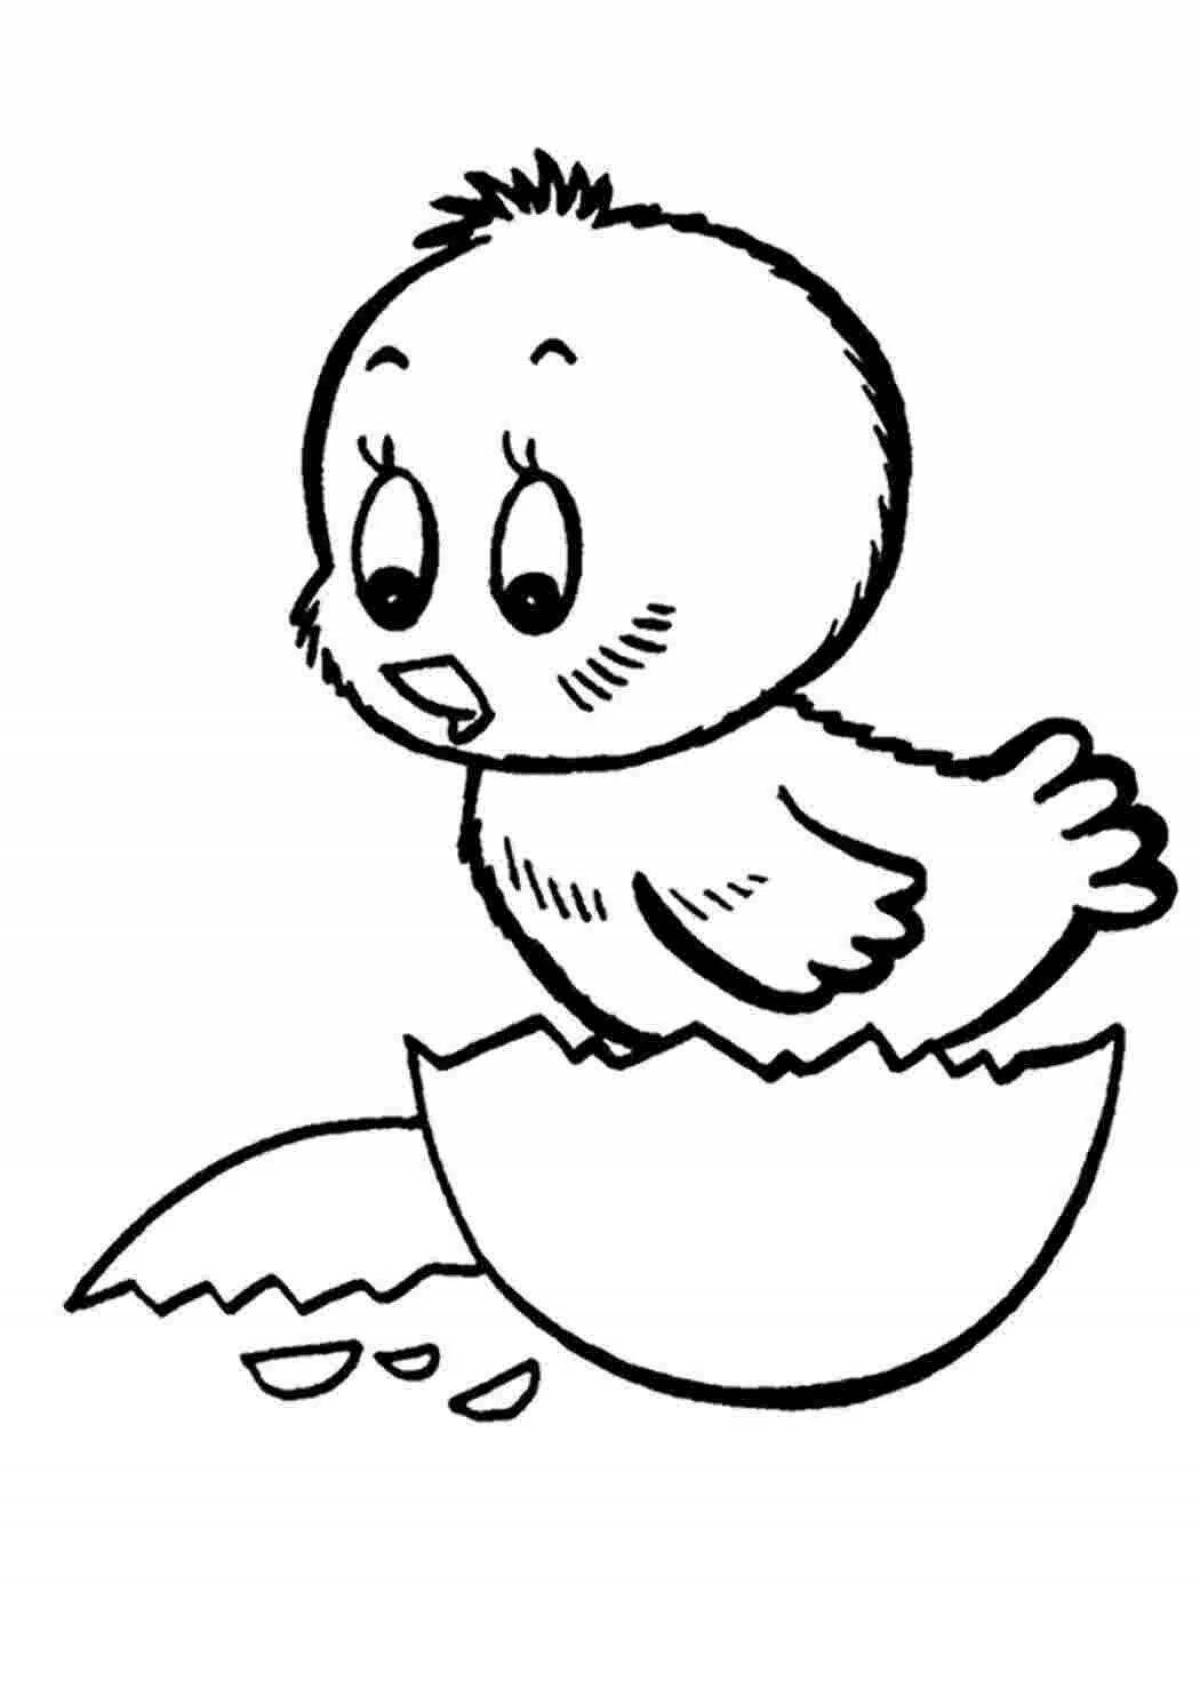 Coloring page shiny chicken in shell